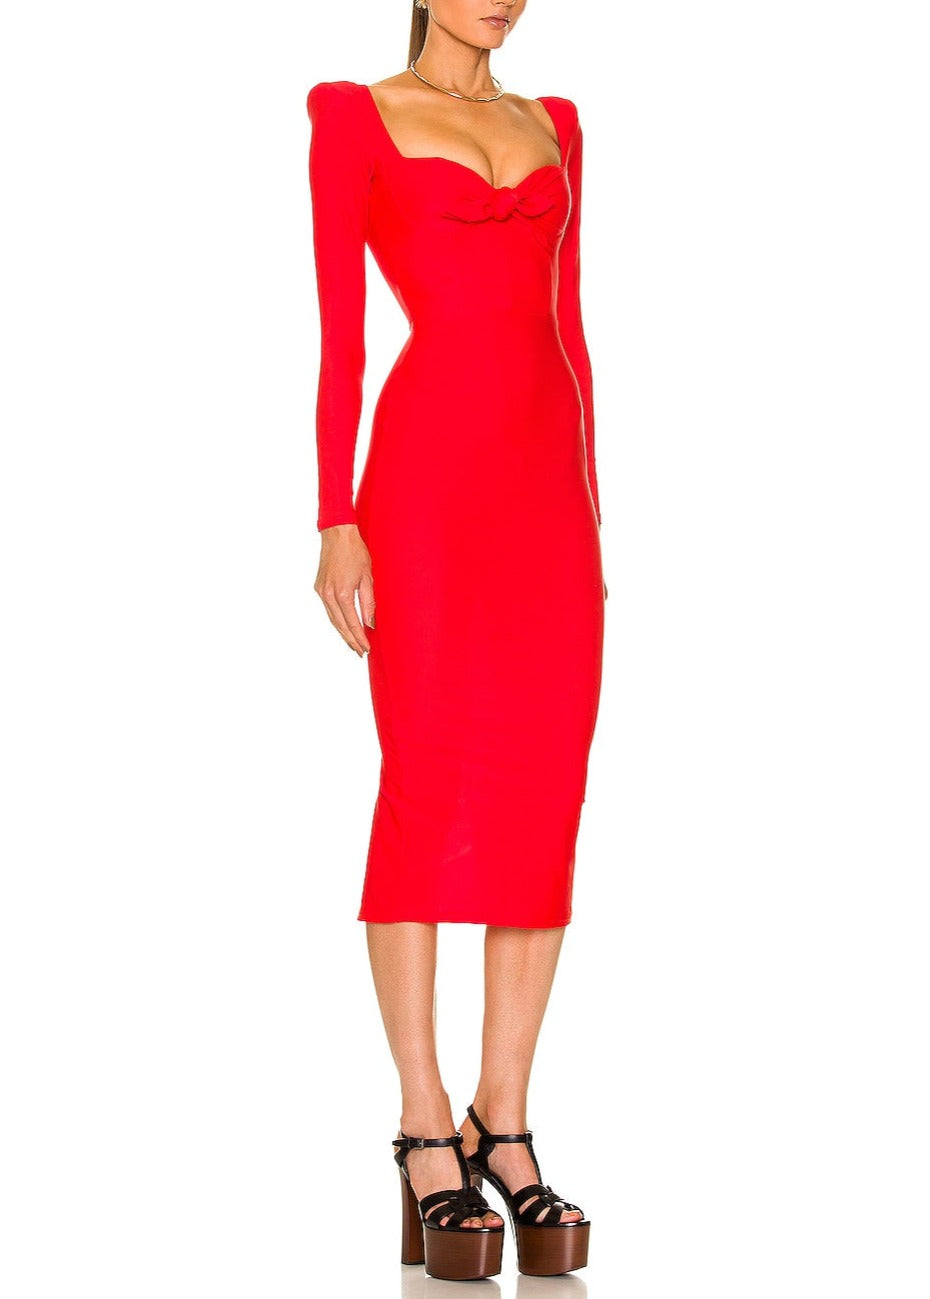 Alex Perry Blade Sweetheart Long Sleeve Cup Dress